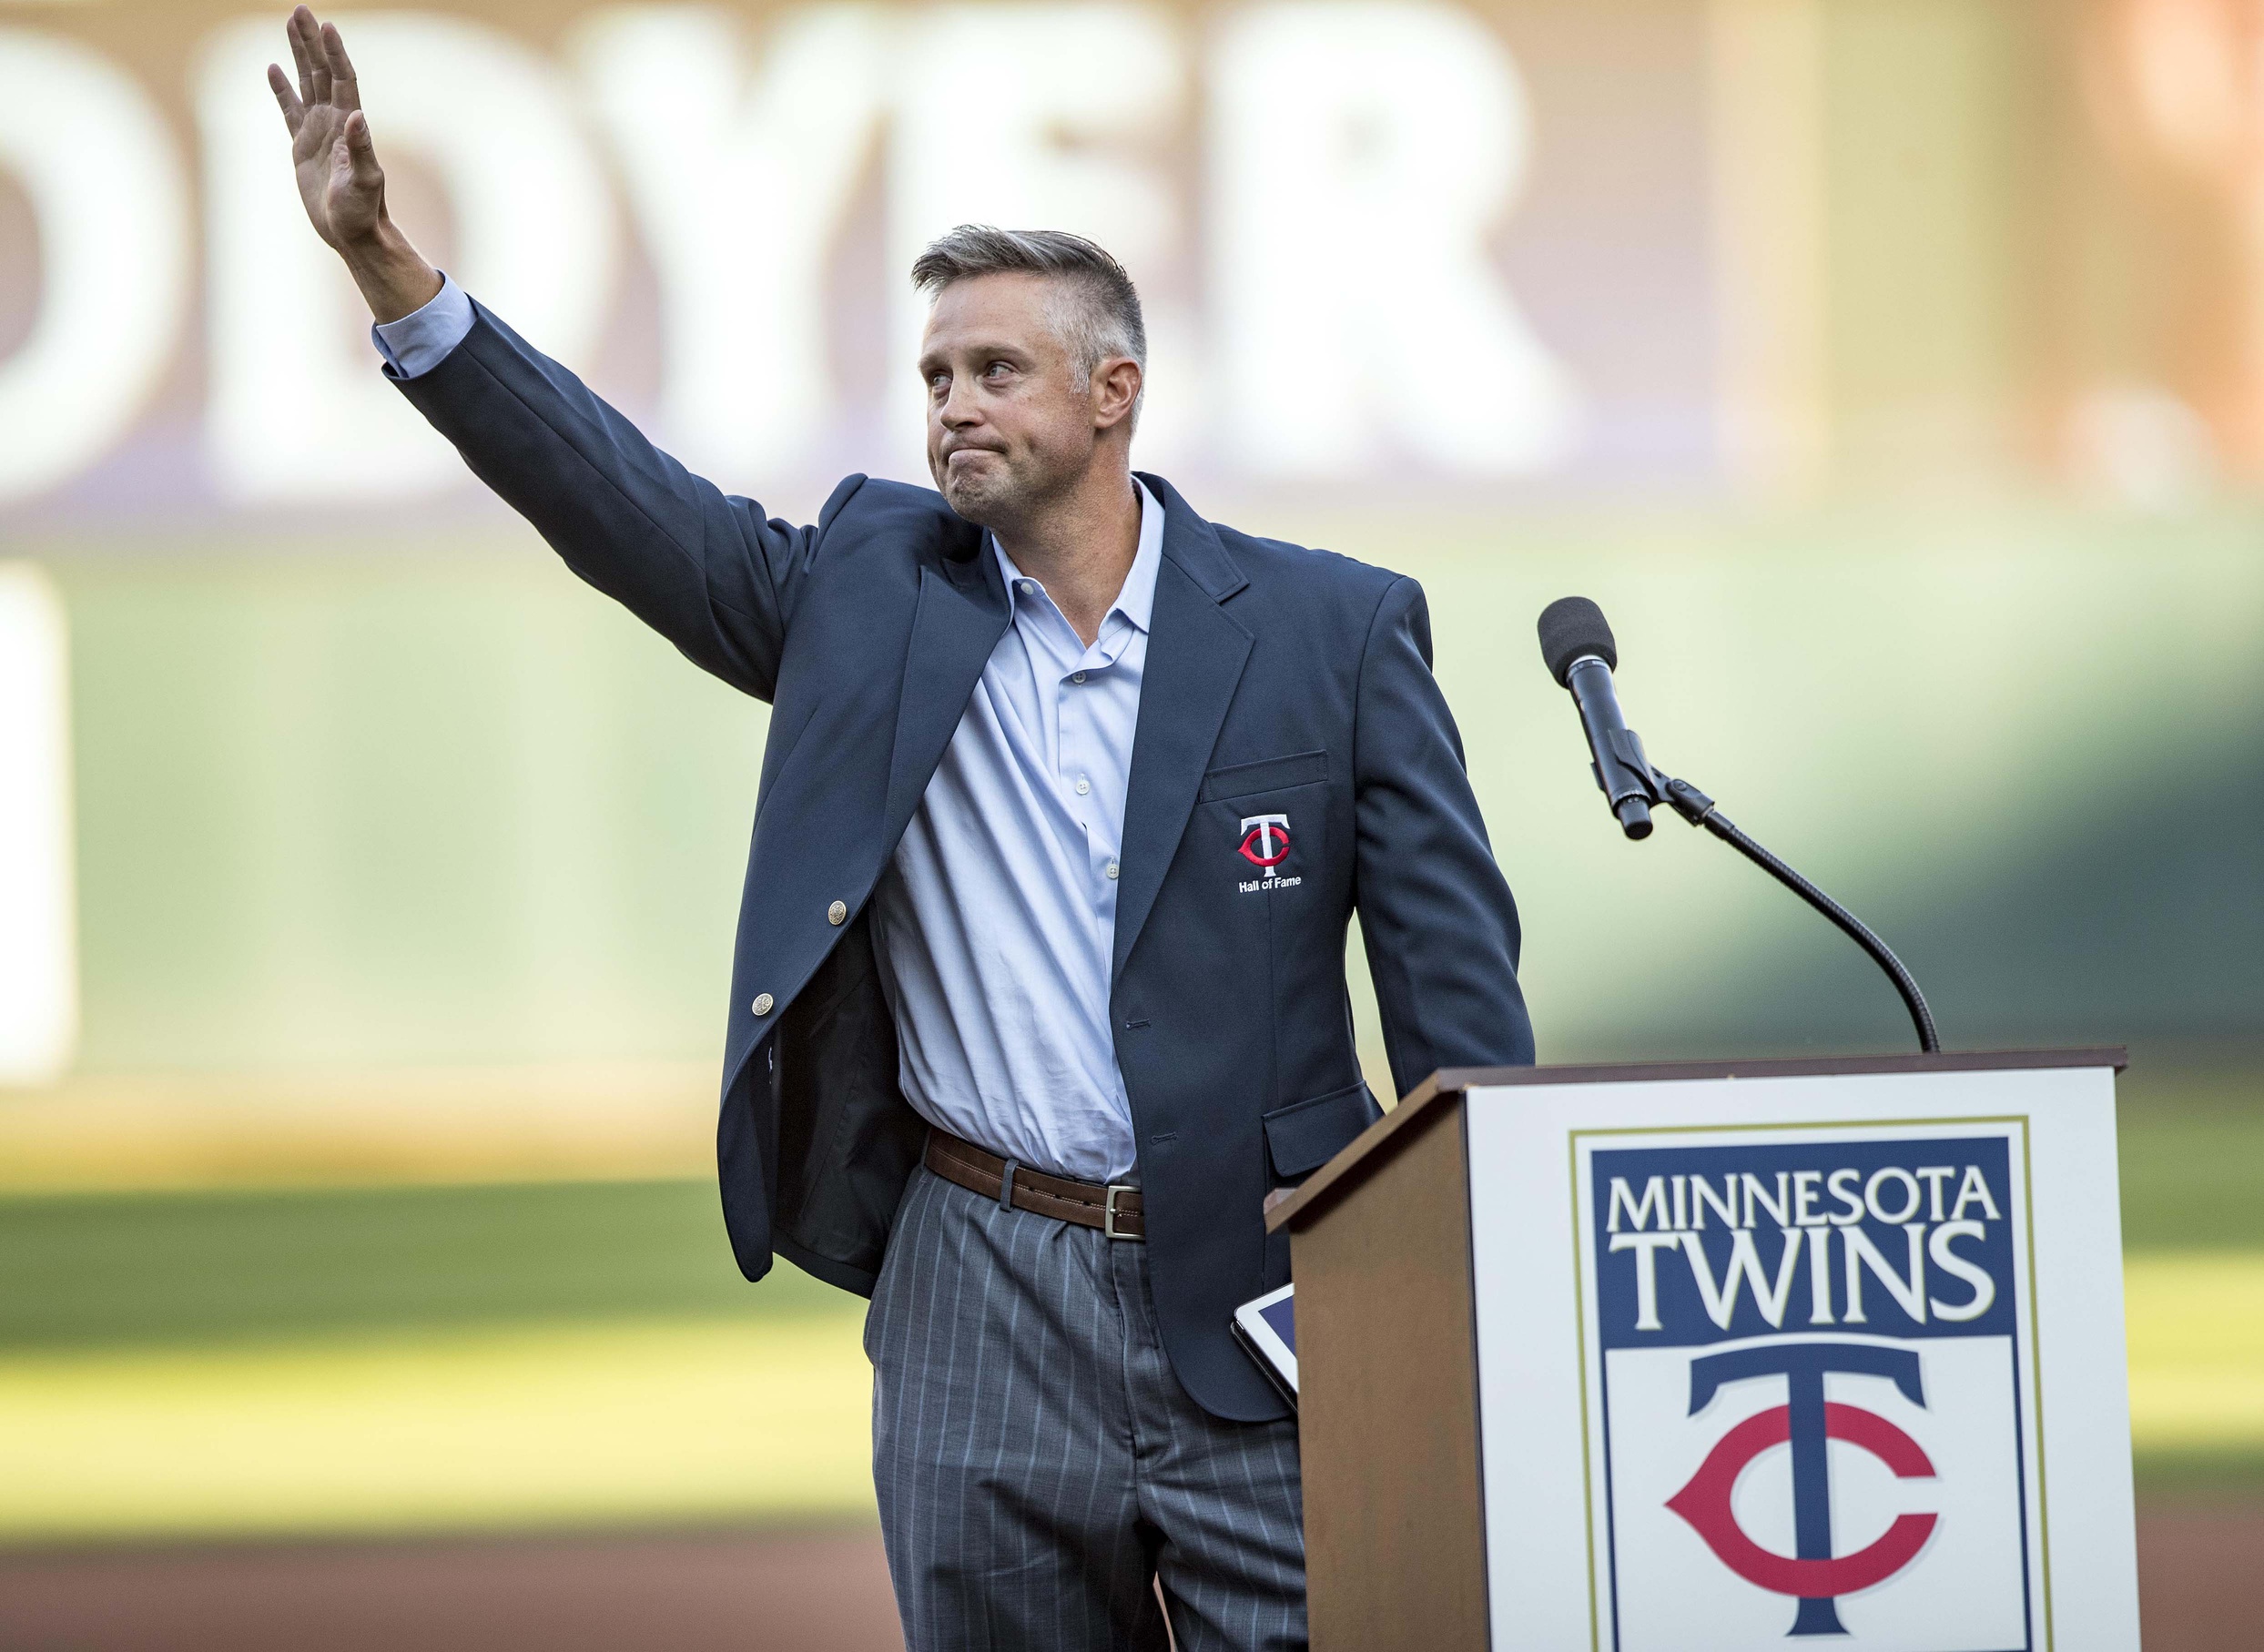 Twins players might get old, but reminiscing about 1987 title doesn't